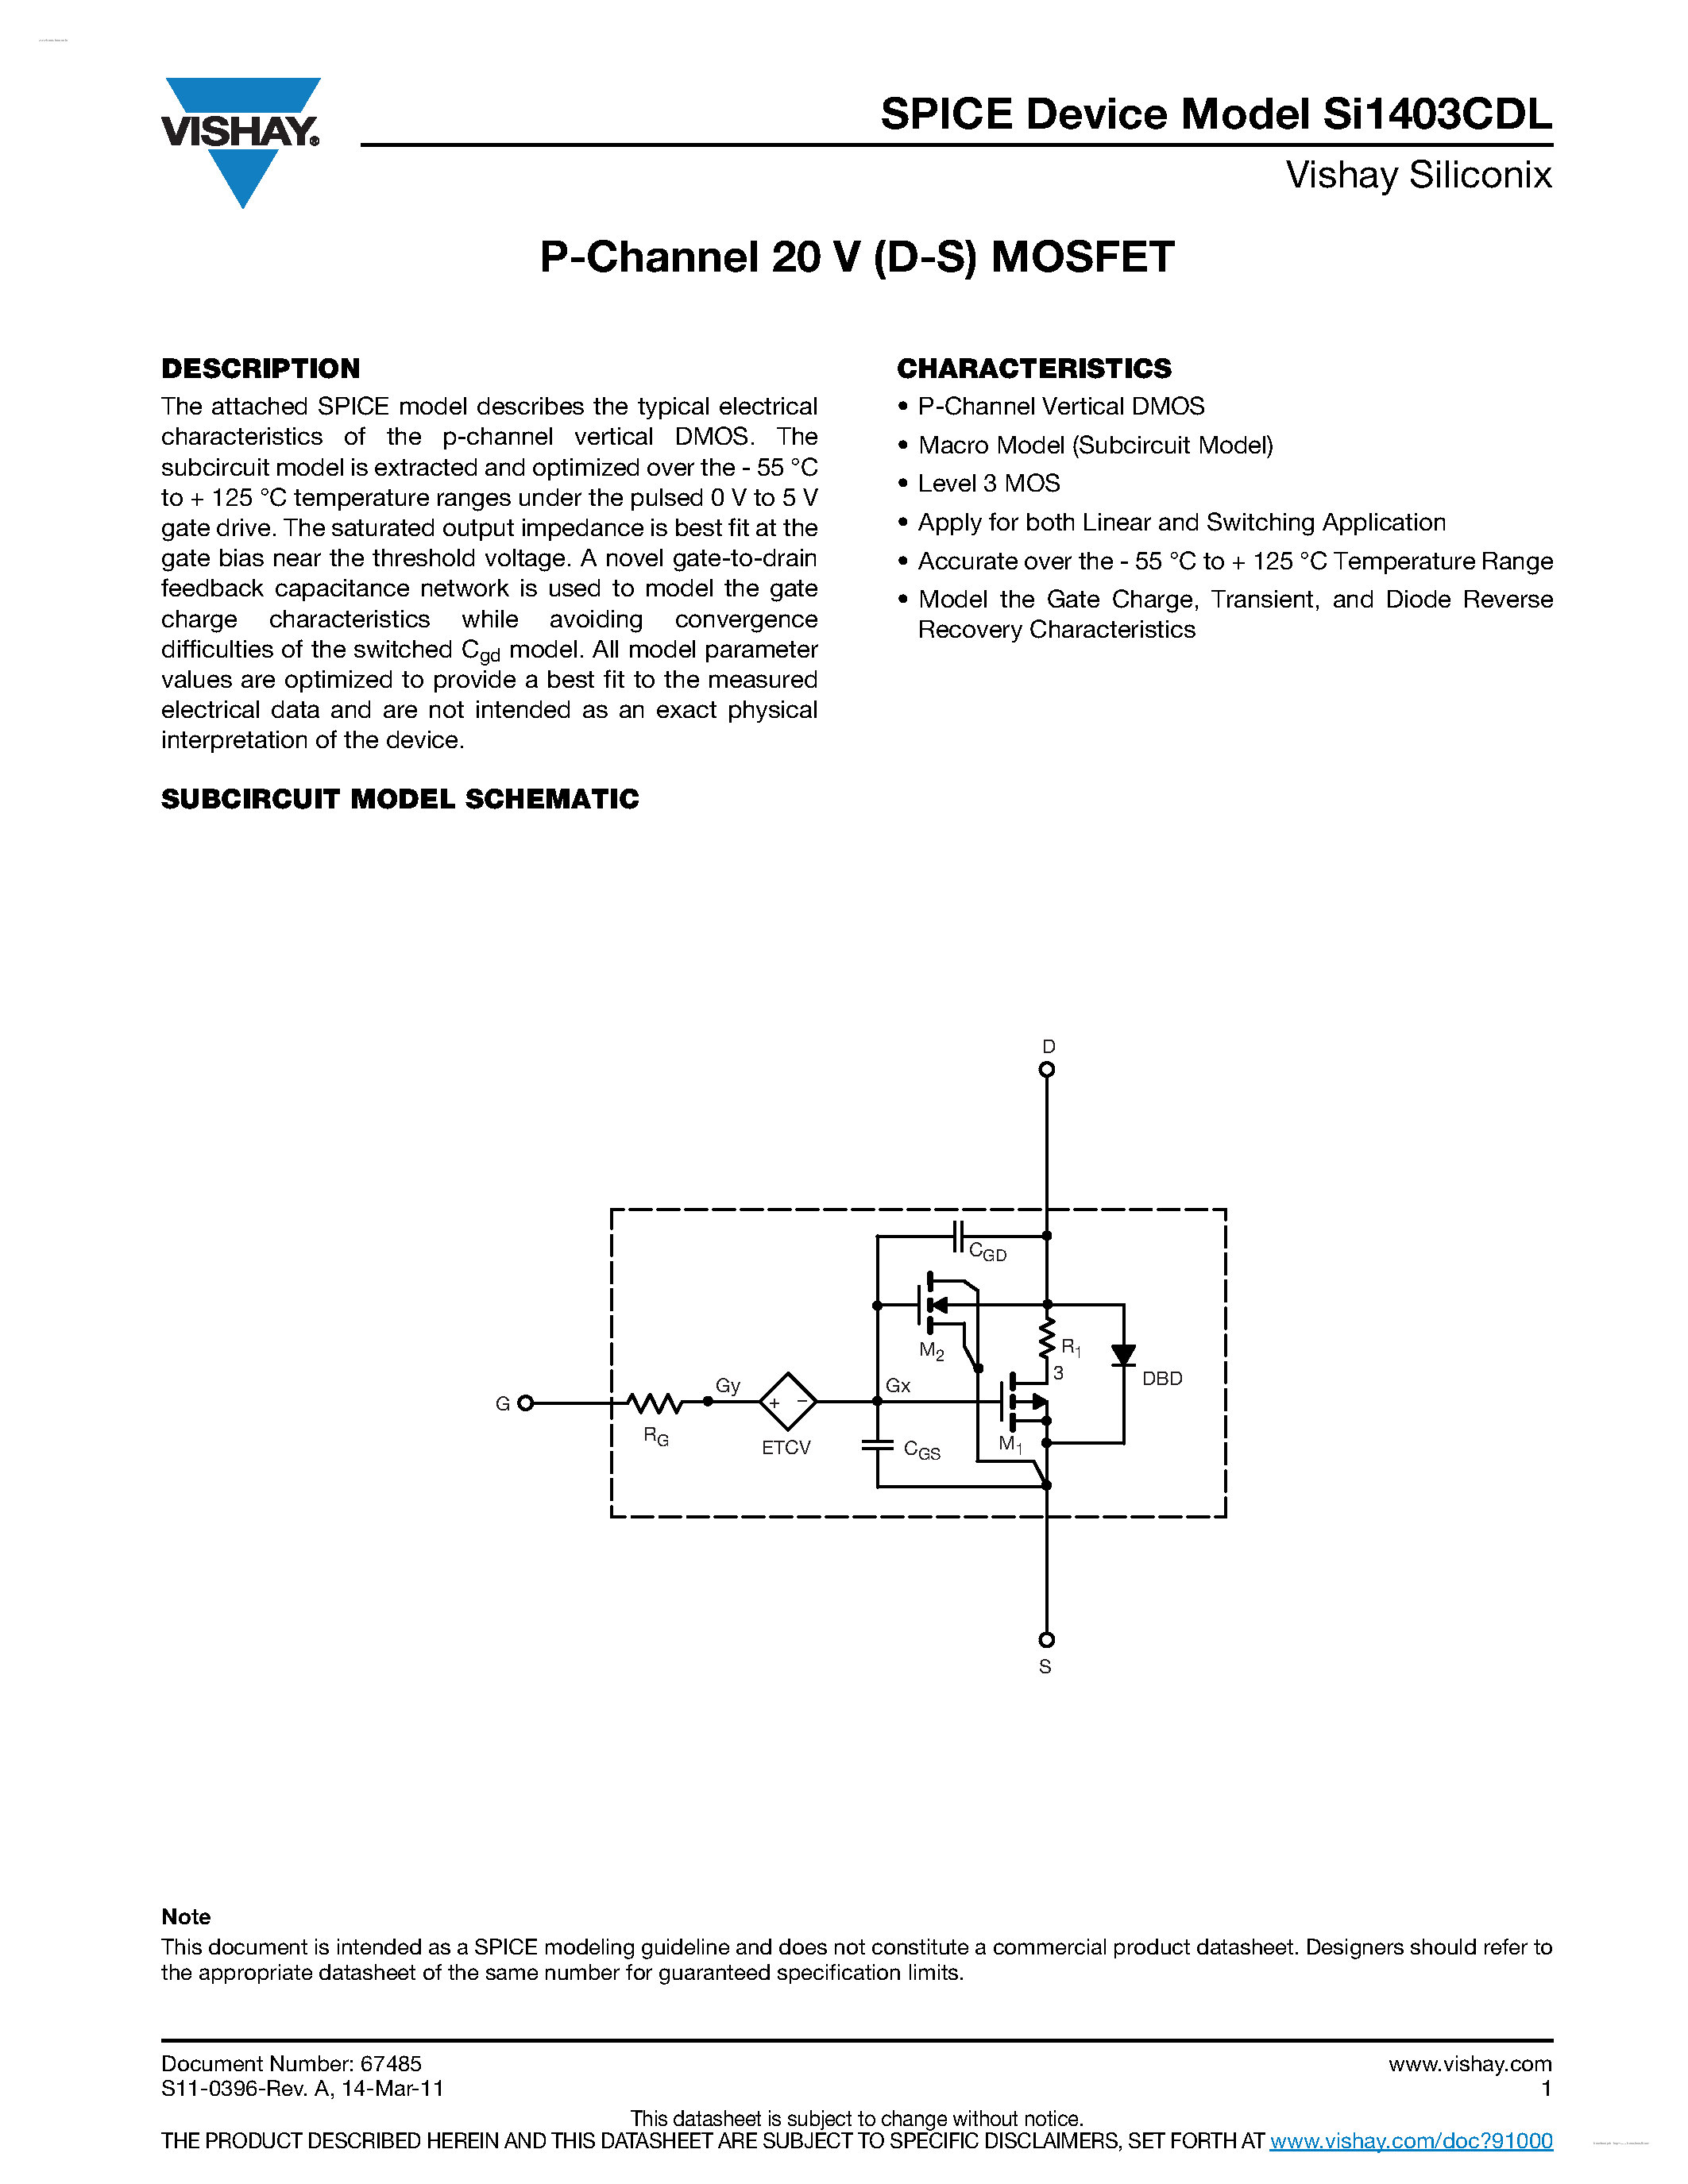 Datasheet SI1403CDL - P-Channel 20 V (D-S) MOSFET page 1